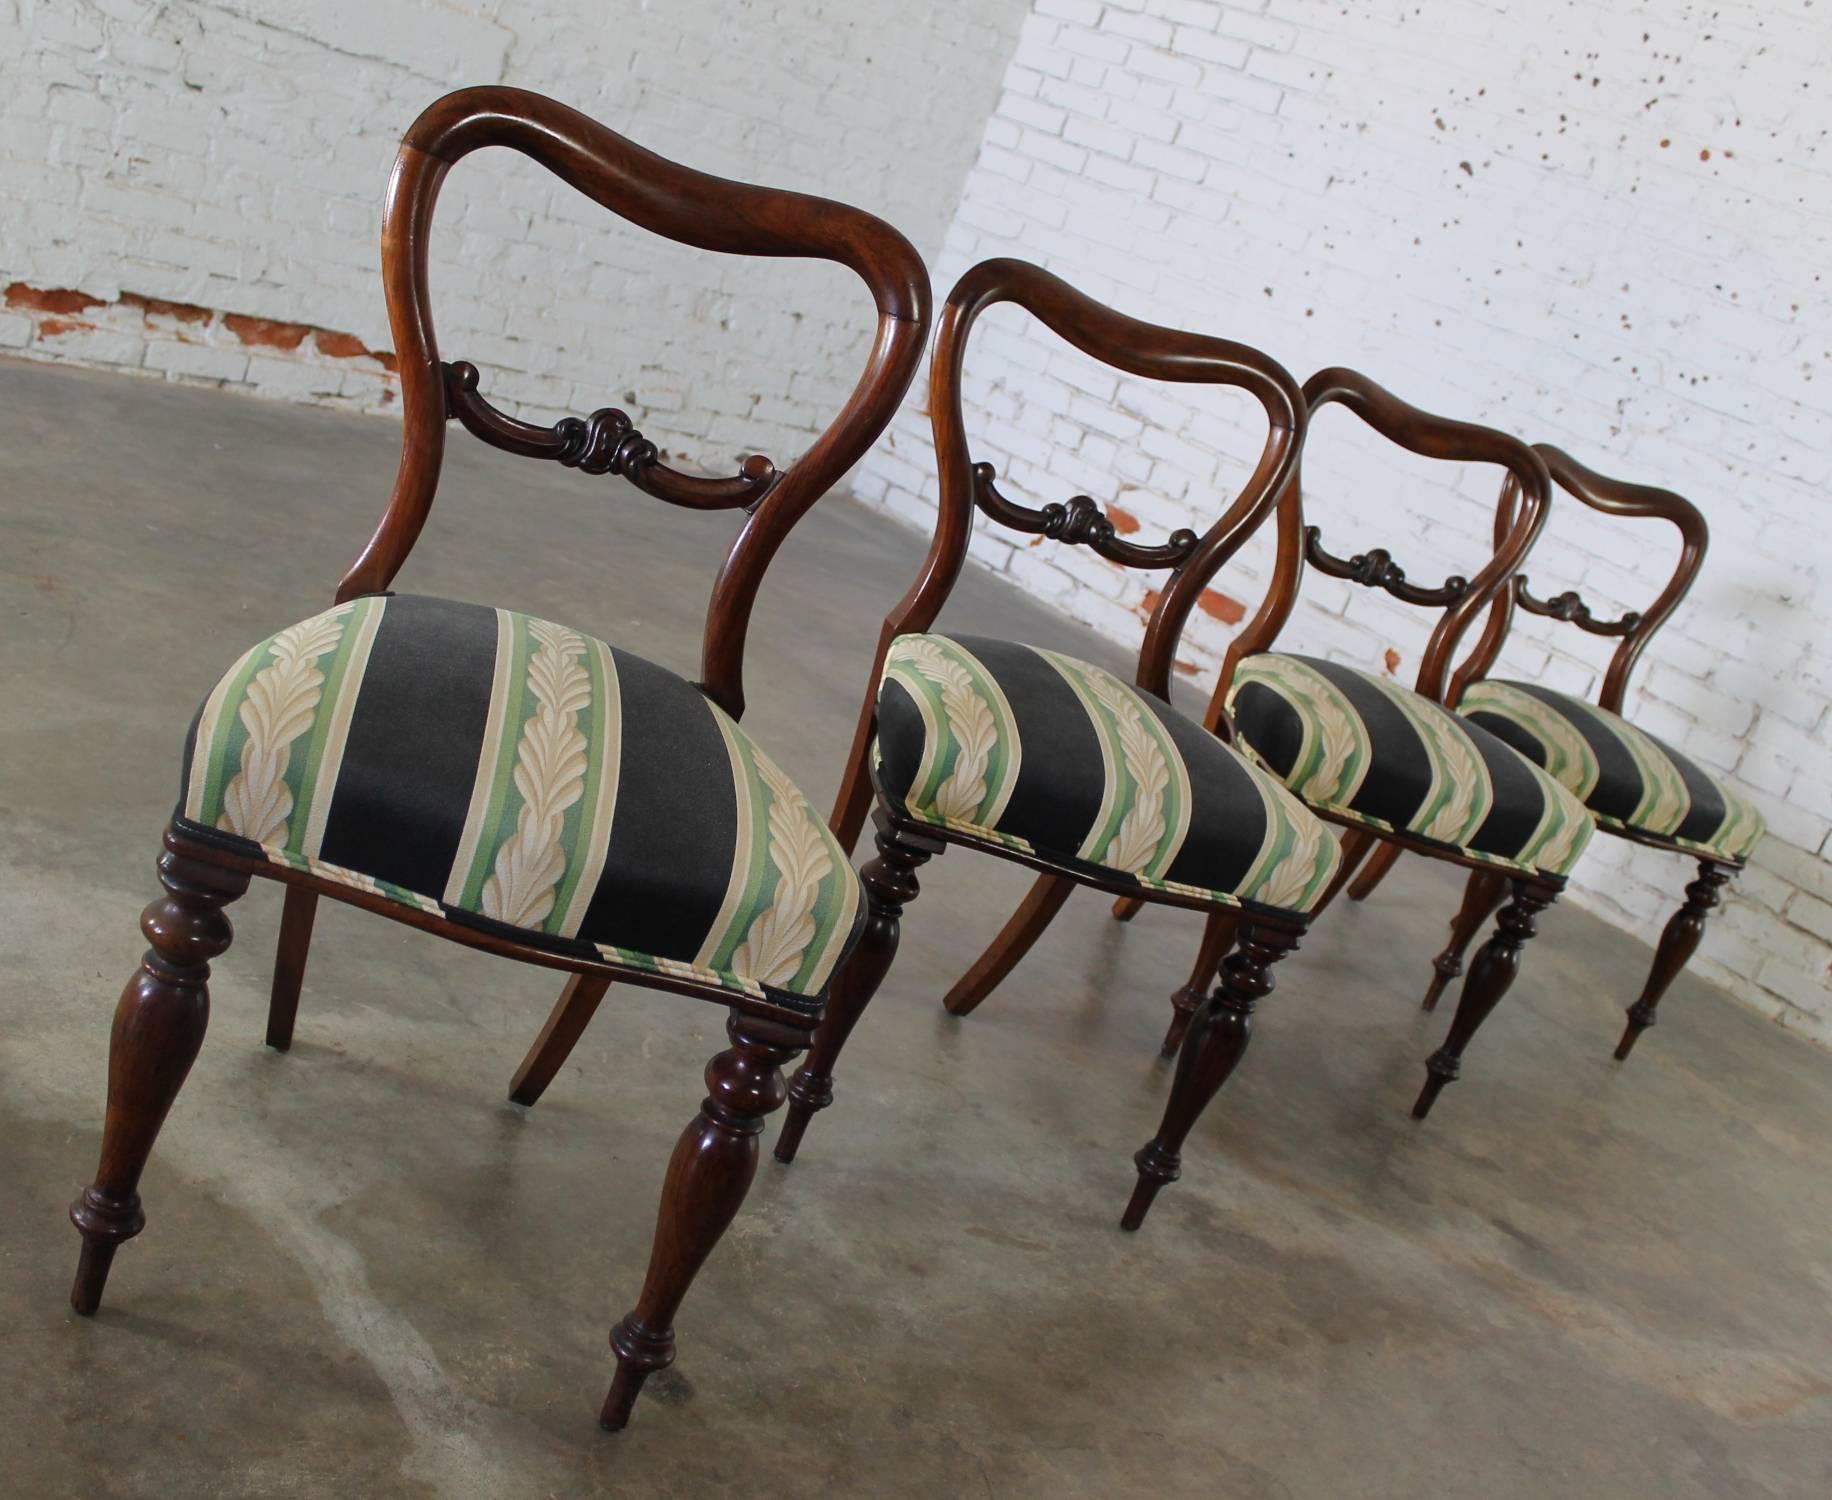 Set of four stately and elegant antique Victorian rosewood dining chairs in the manner of Gillows. They are all in wonderful condition, recently upholstered and ready to use.

Beautiful set of four antique Victorian rosewood dining chairs in the